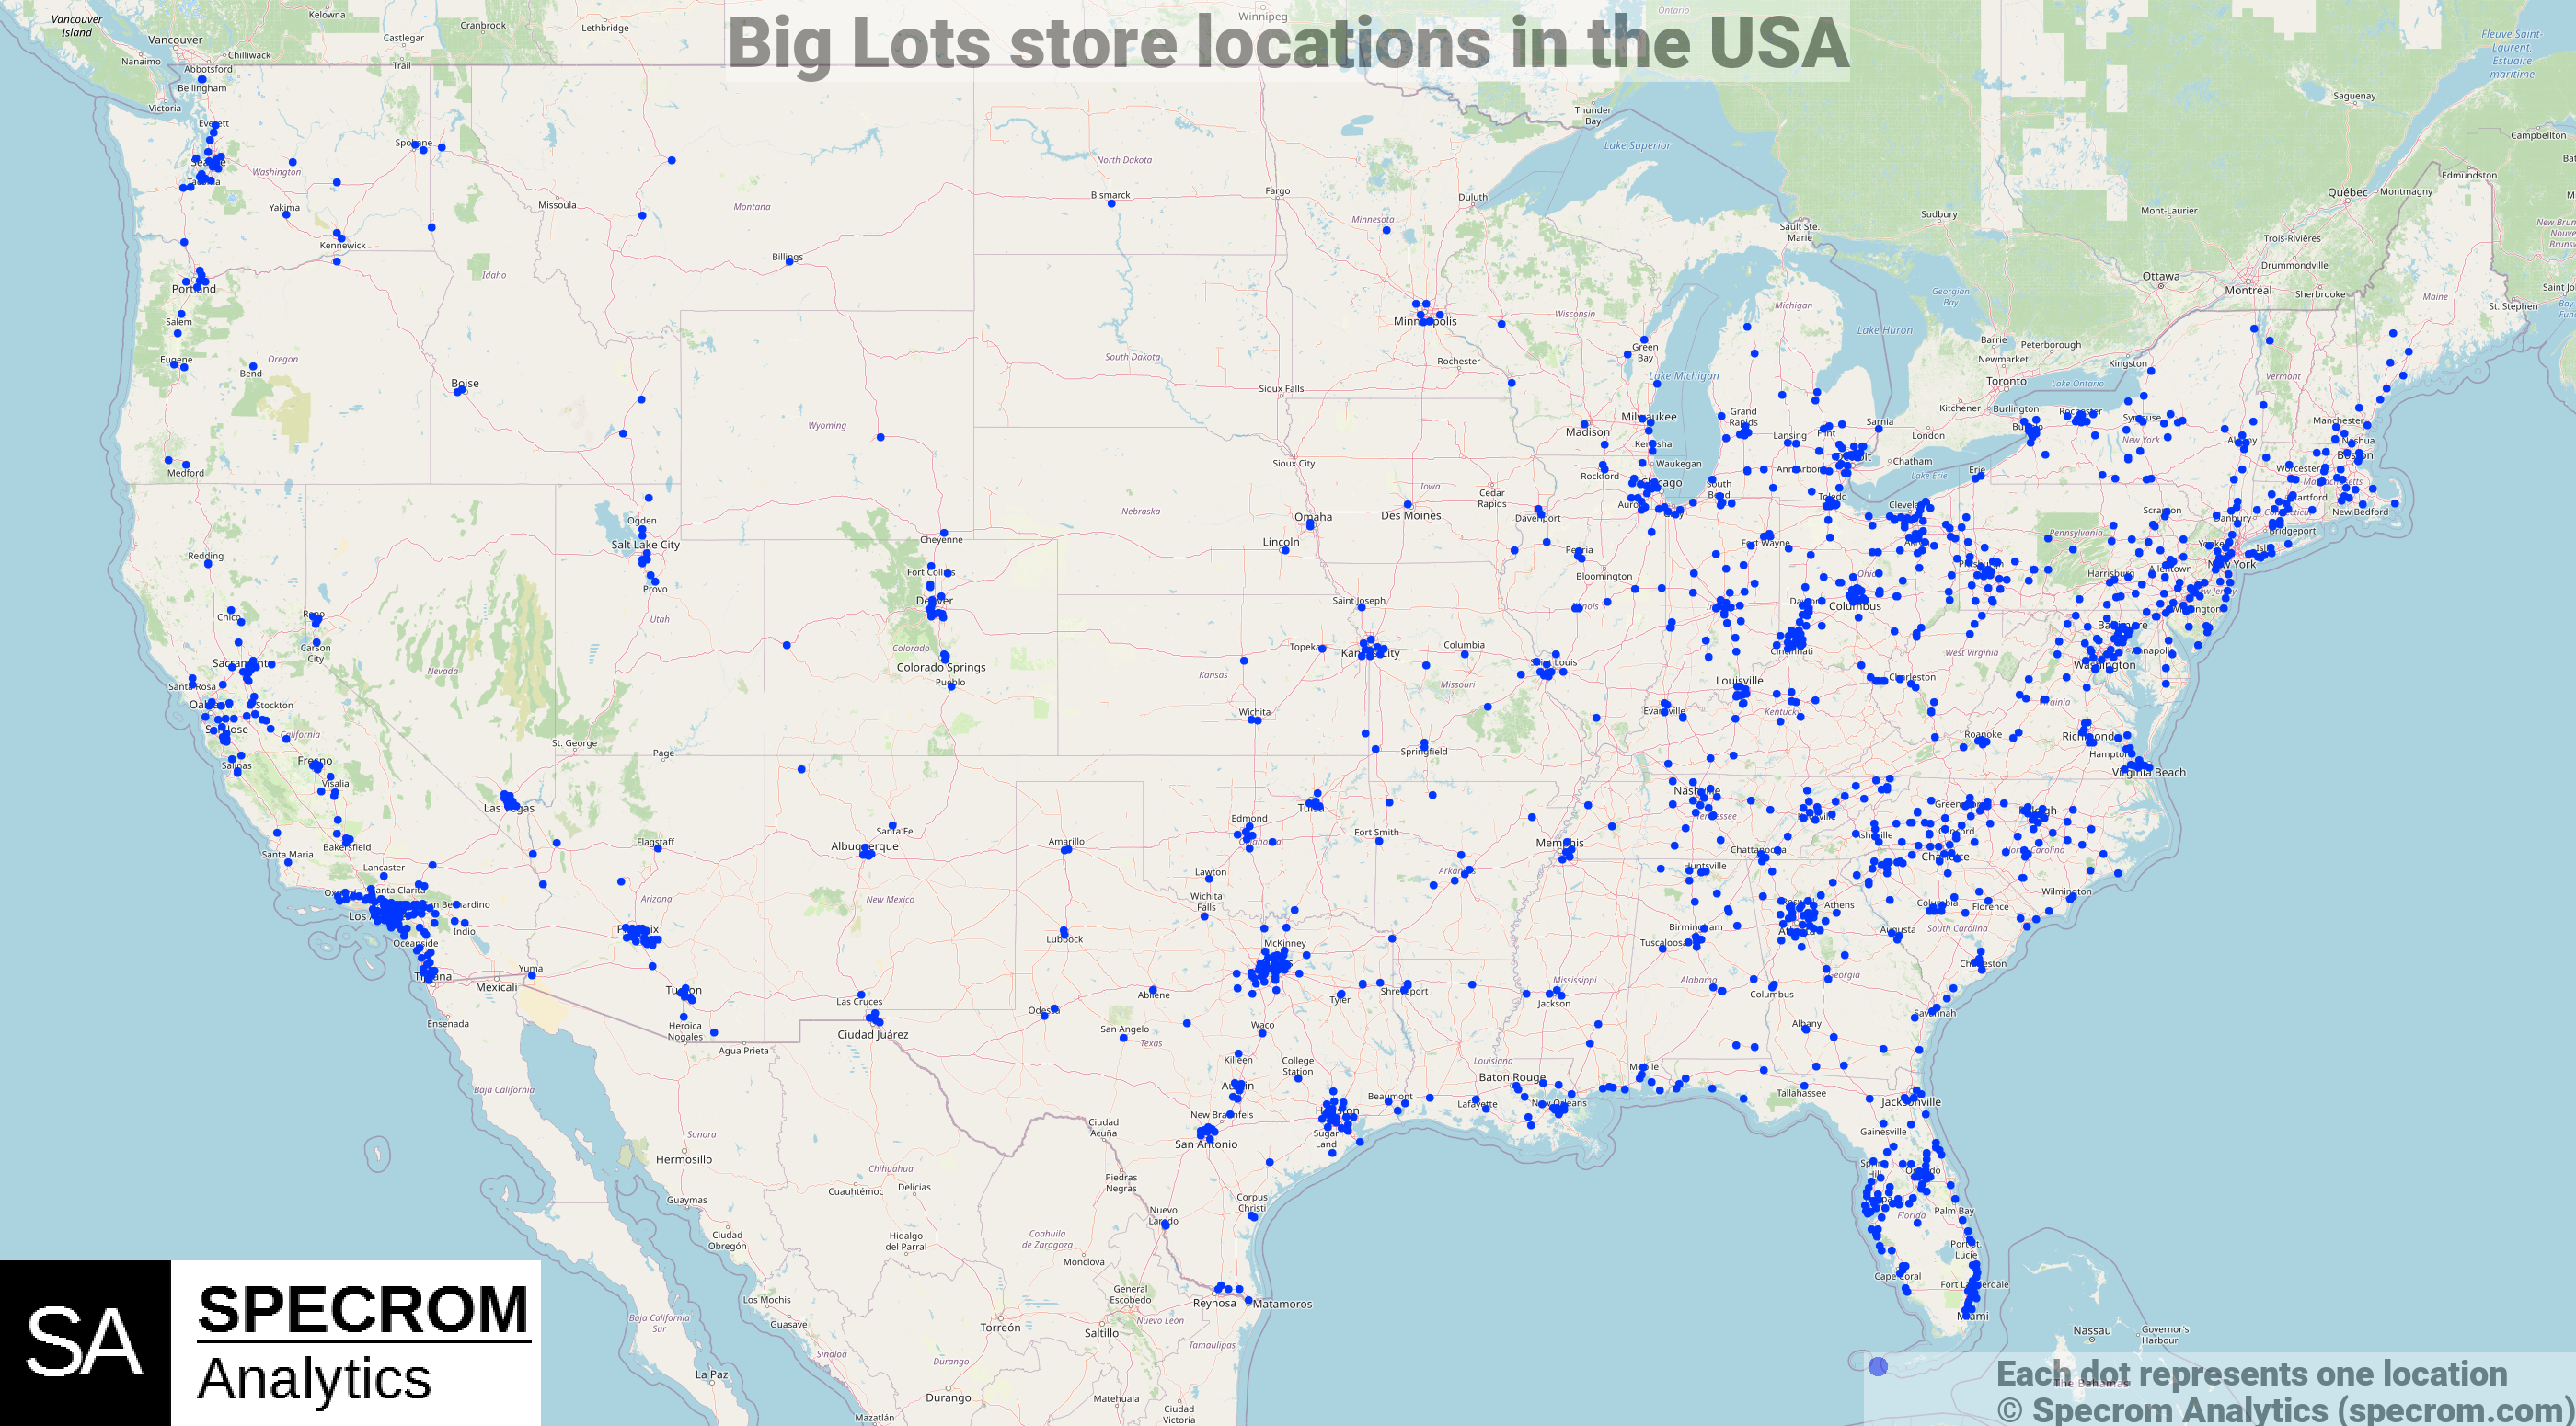 Big Lots store locations in the USA